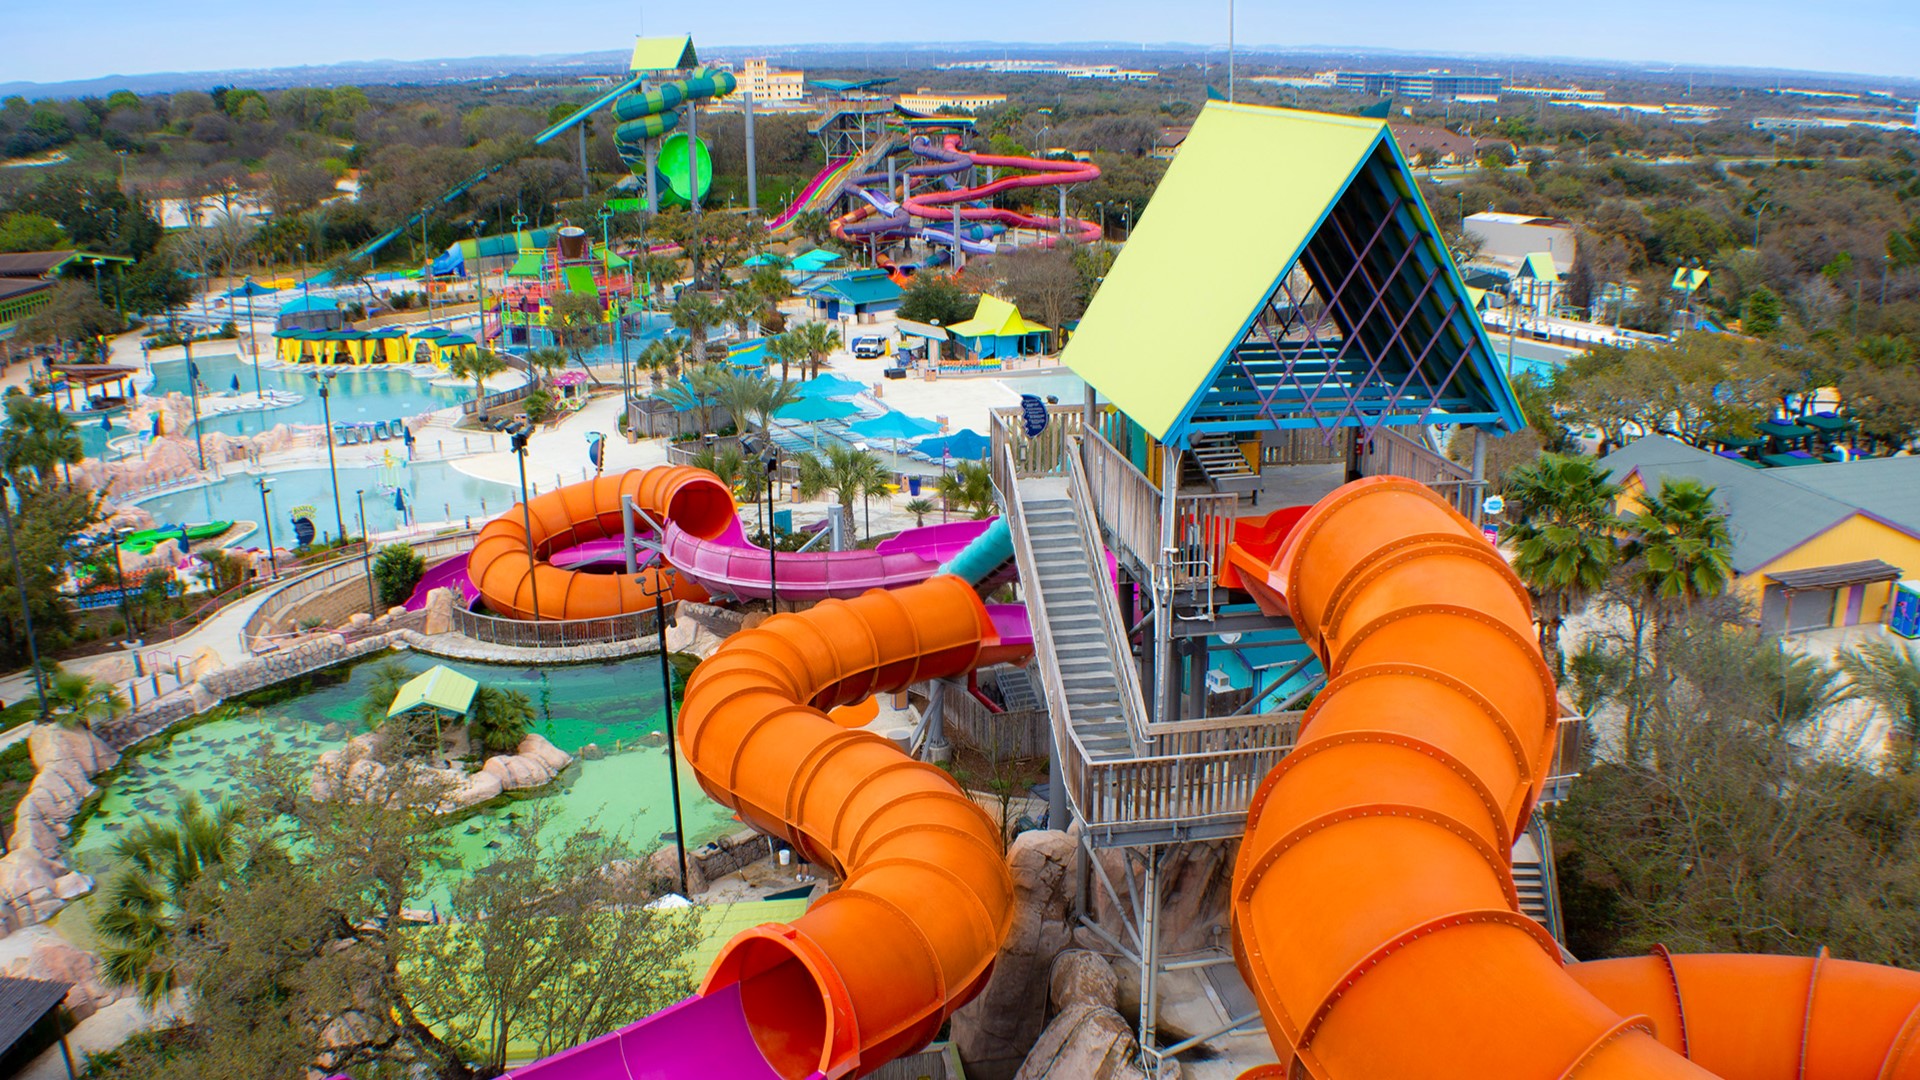 The water park at SeaWorld is extending its operating days to be open from 11 a.m. to 6 p.m. from March 6-14.